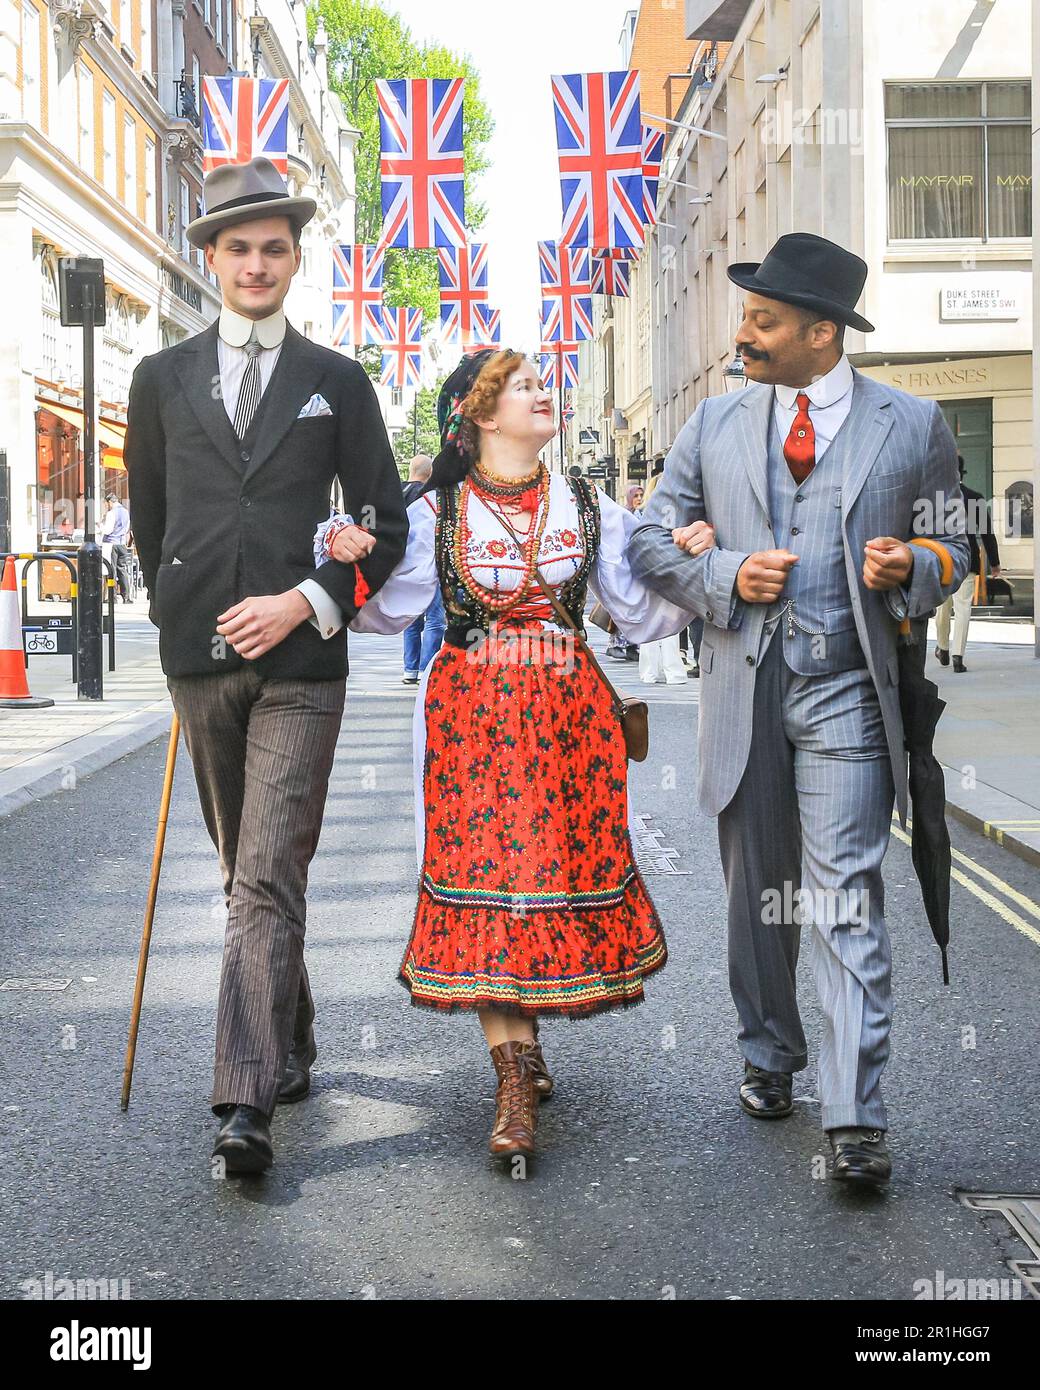 London, UK. 14th May, 2023. Two chaps gentlemanly walk with a young lady in Polish folk dress along Jermyn Street. The annual Grand Flaneur Walk sees chaps and chapettes, dandies and quaintrelle in impeccable tailoring and style flanning and sauntering without purpose around St James' and surrounding areas of London. The walk always starts at the statue of socialite dandy Beau Brummell and slowly makes its way around the area. Credit: Imageplotter/Alamy Live News Stock Photo